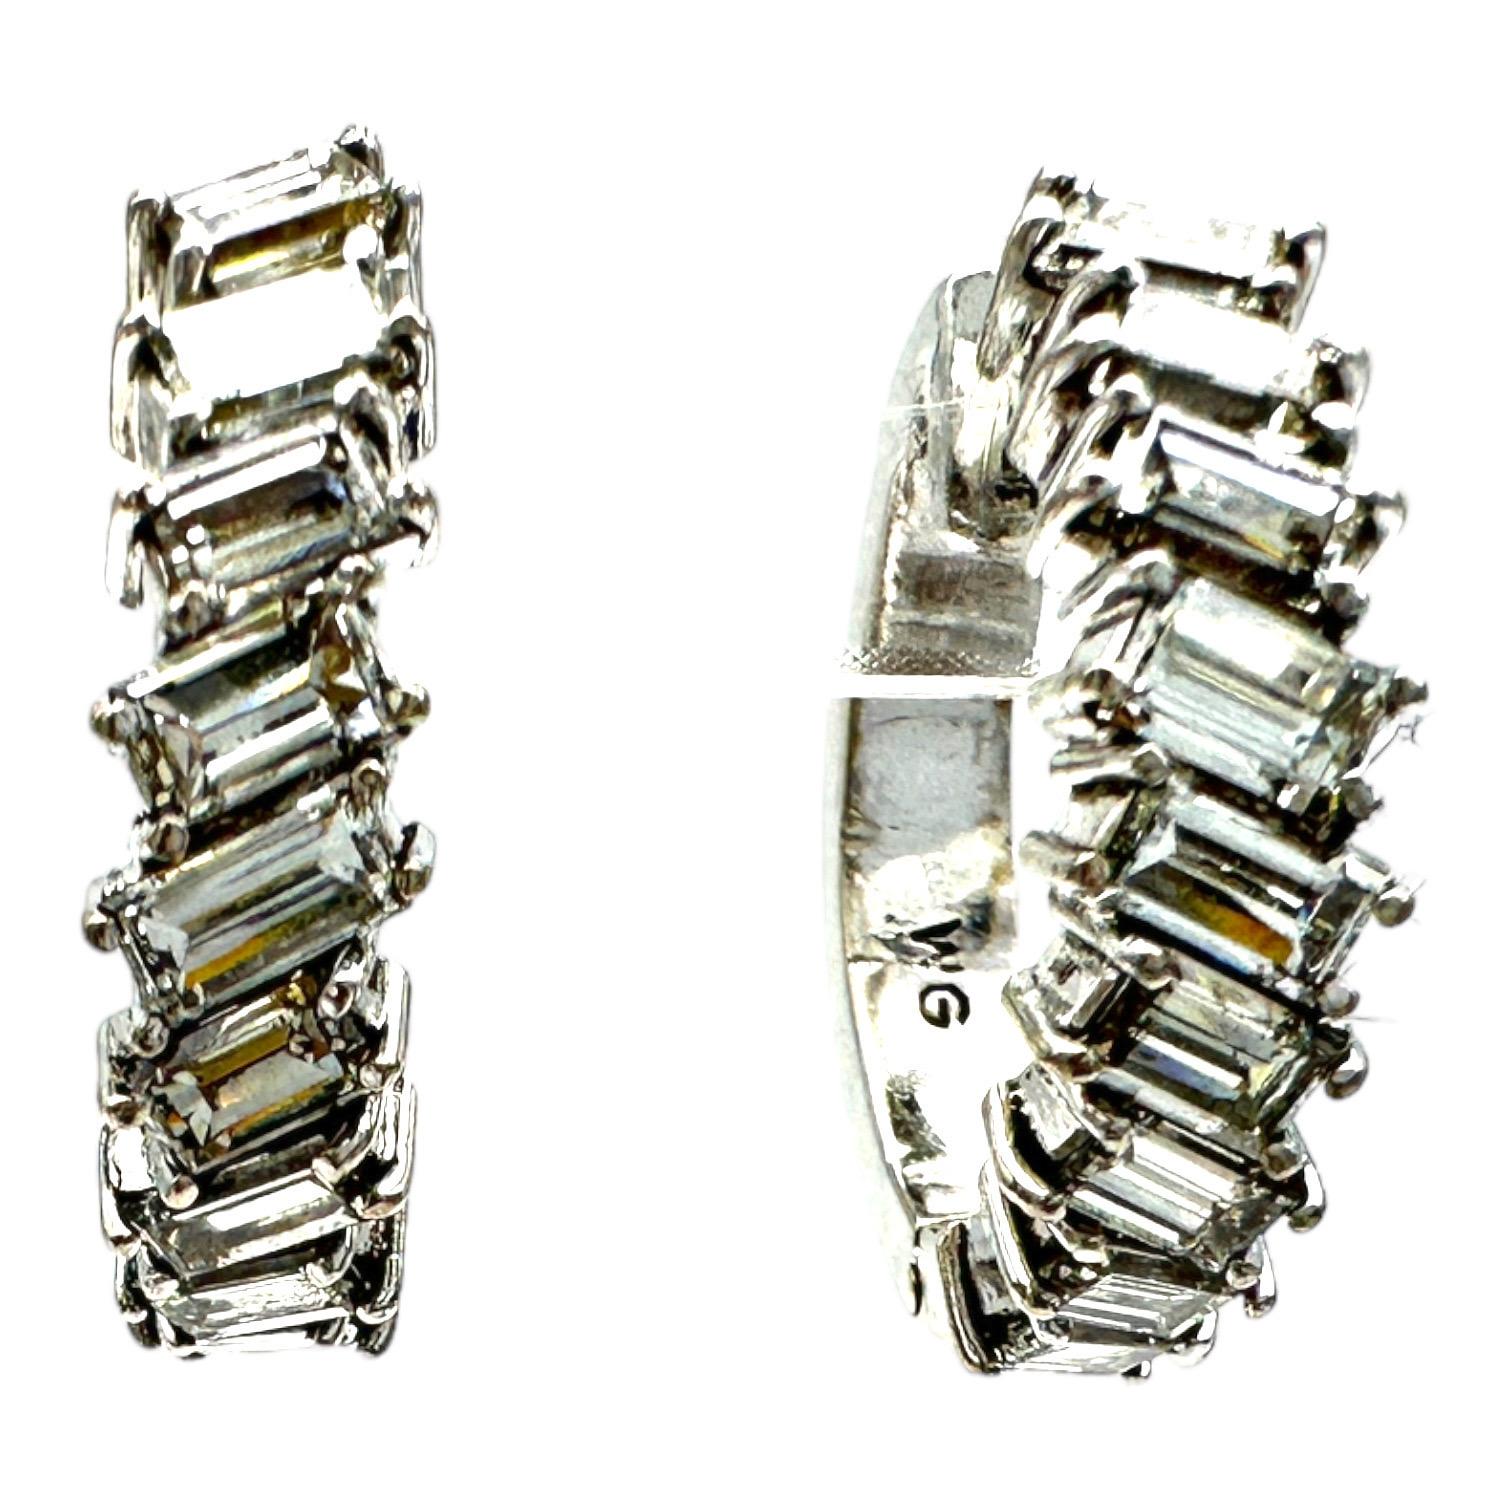 18kt White Gold Baguette Diamond Hoop Earrings 2.75 Carats VS In Excellent Condition For Sale In Laguna Hills, CA